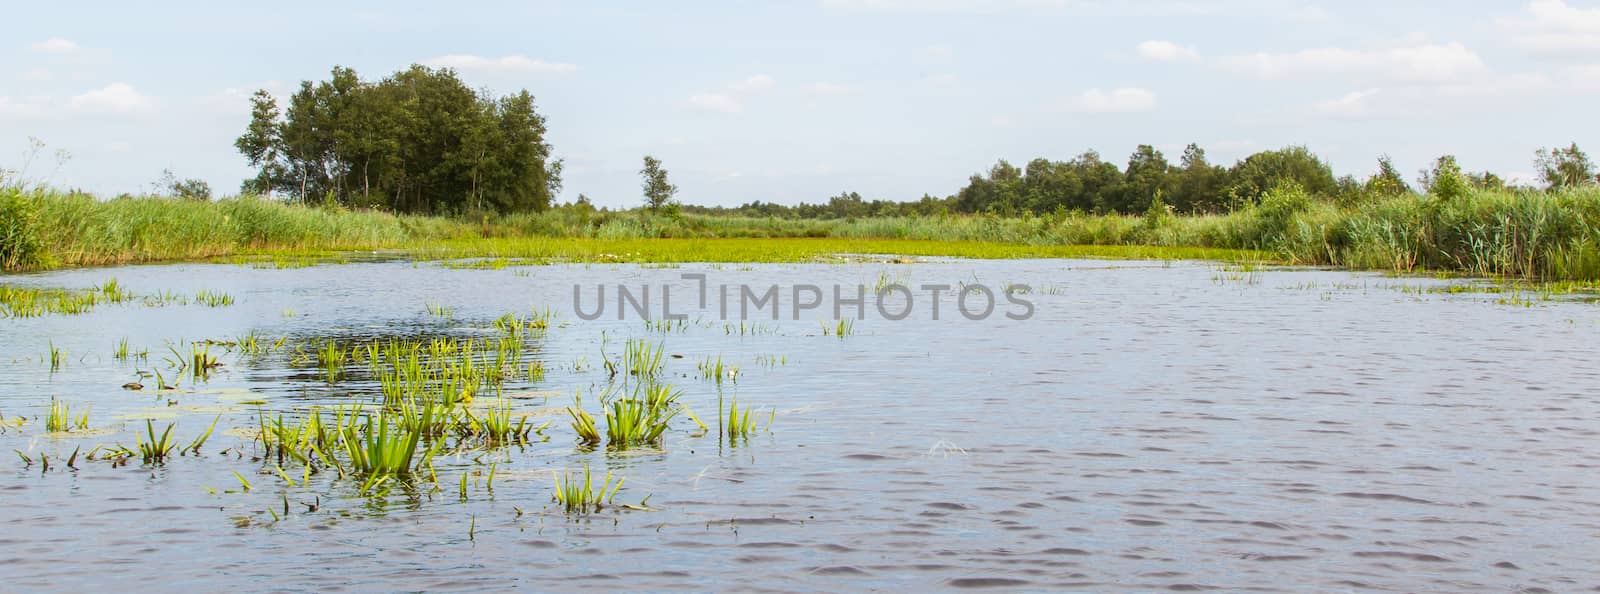 Typical view of a the swamp in National Park Weerribben in the Netherlands